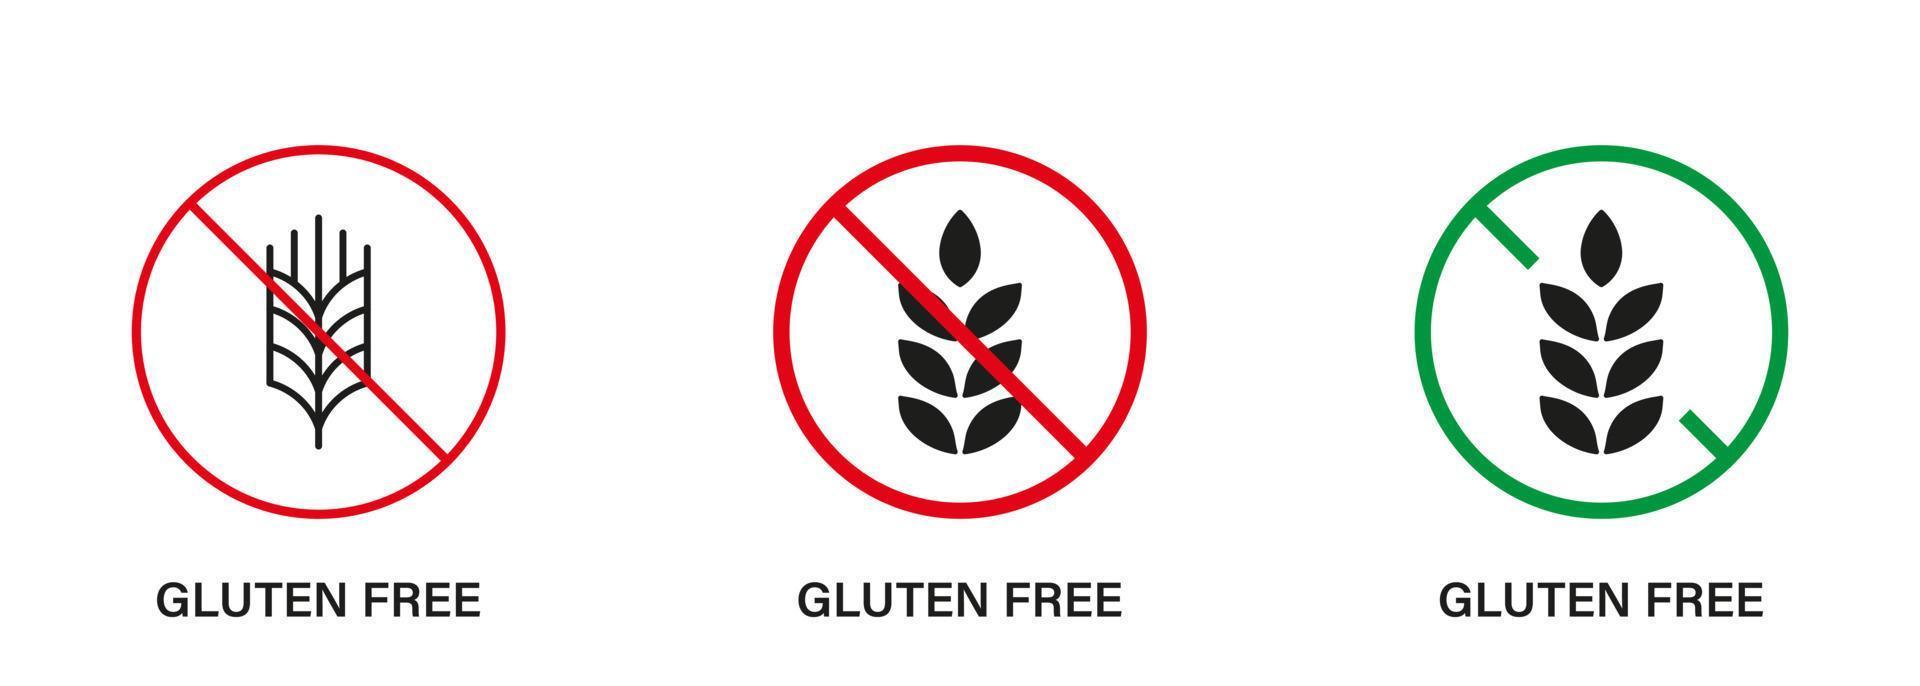 Gluten Free Silhouette and Line Icon Set. No Gluten Food. Allergic on Wheat Sign Collection. Allergy Wheat Forbidden Symbol. Gluten Nutrition Ban Logo. Organic Grain. Isolated Vector Illustration.